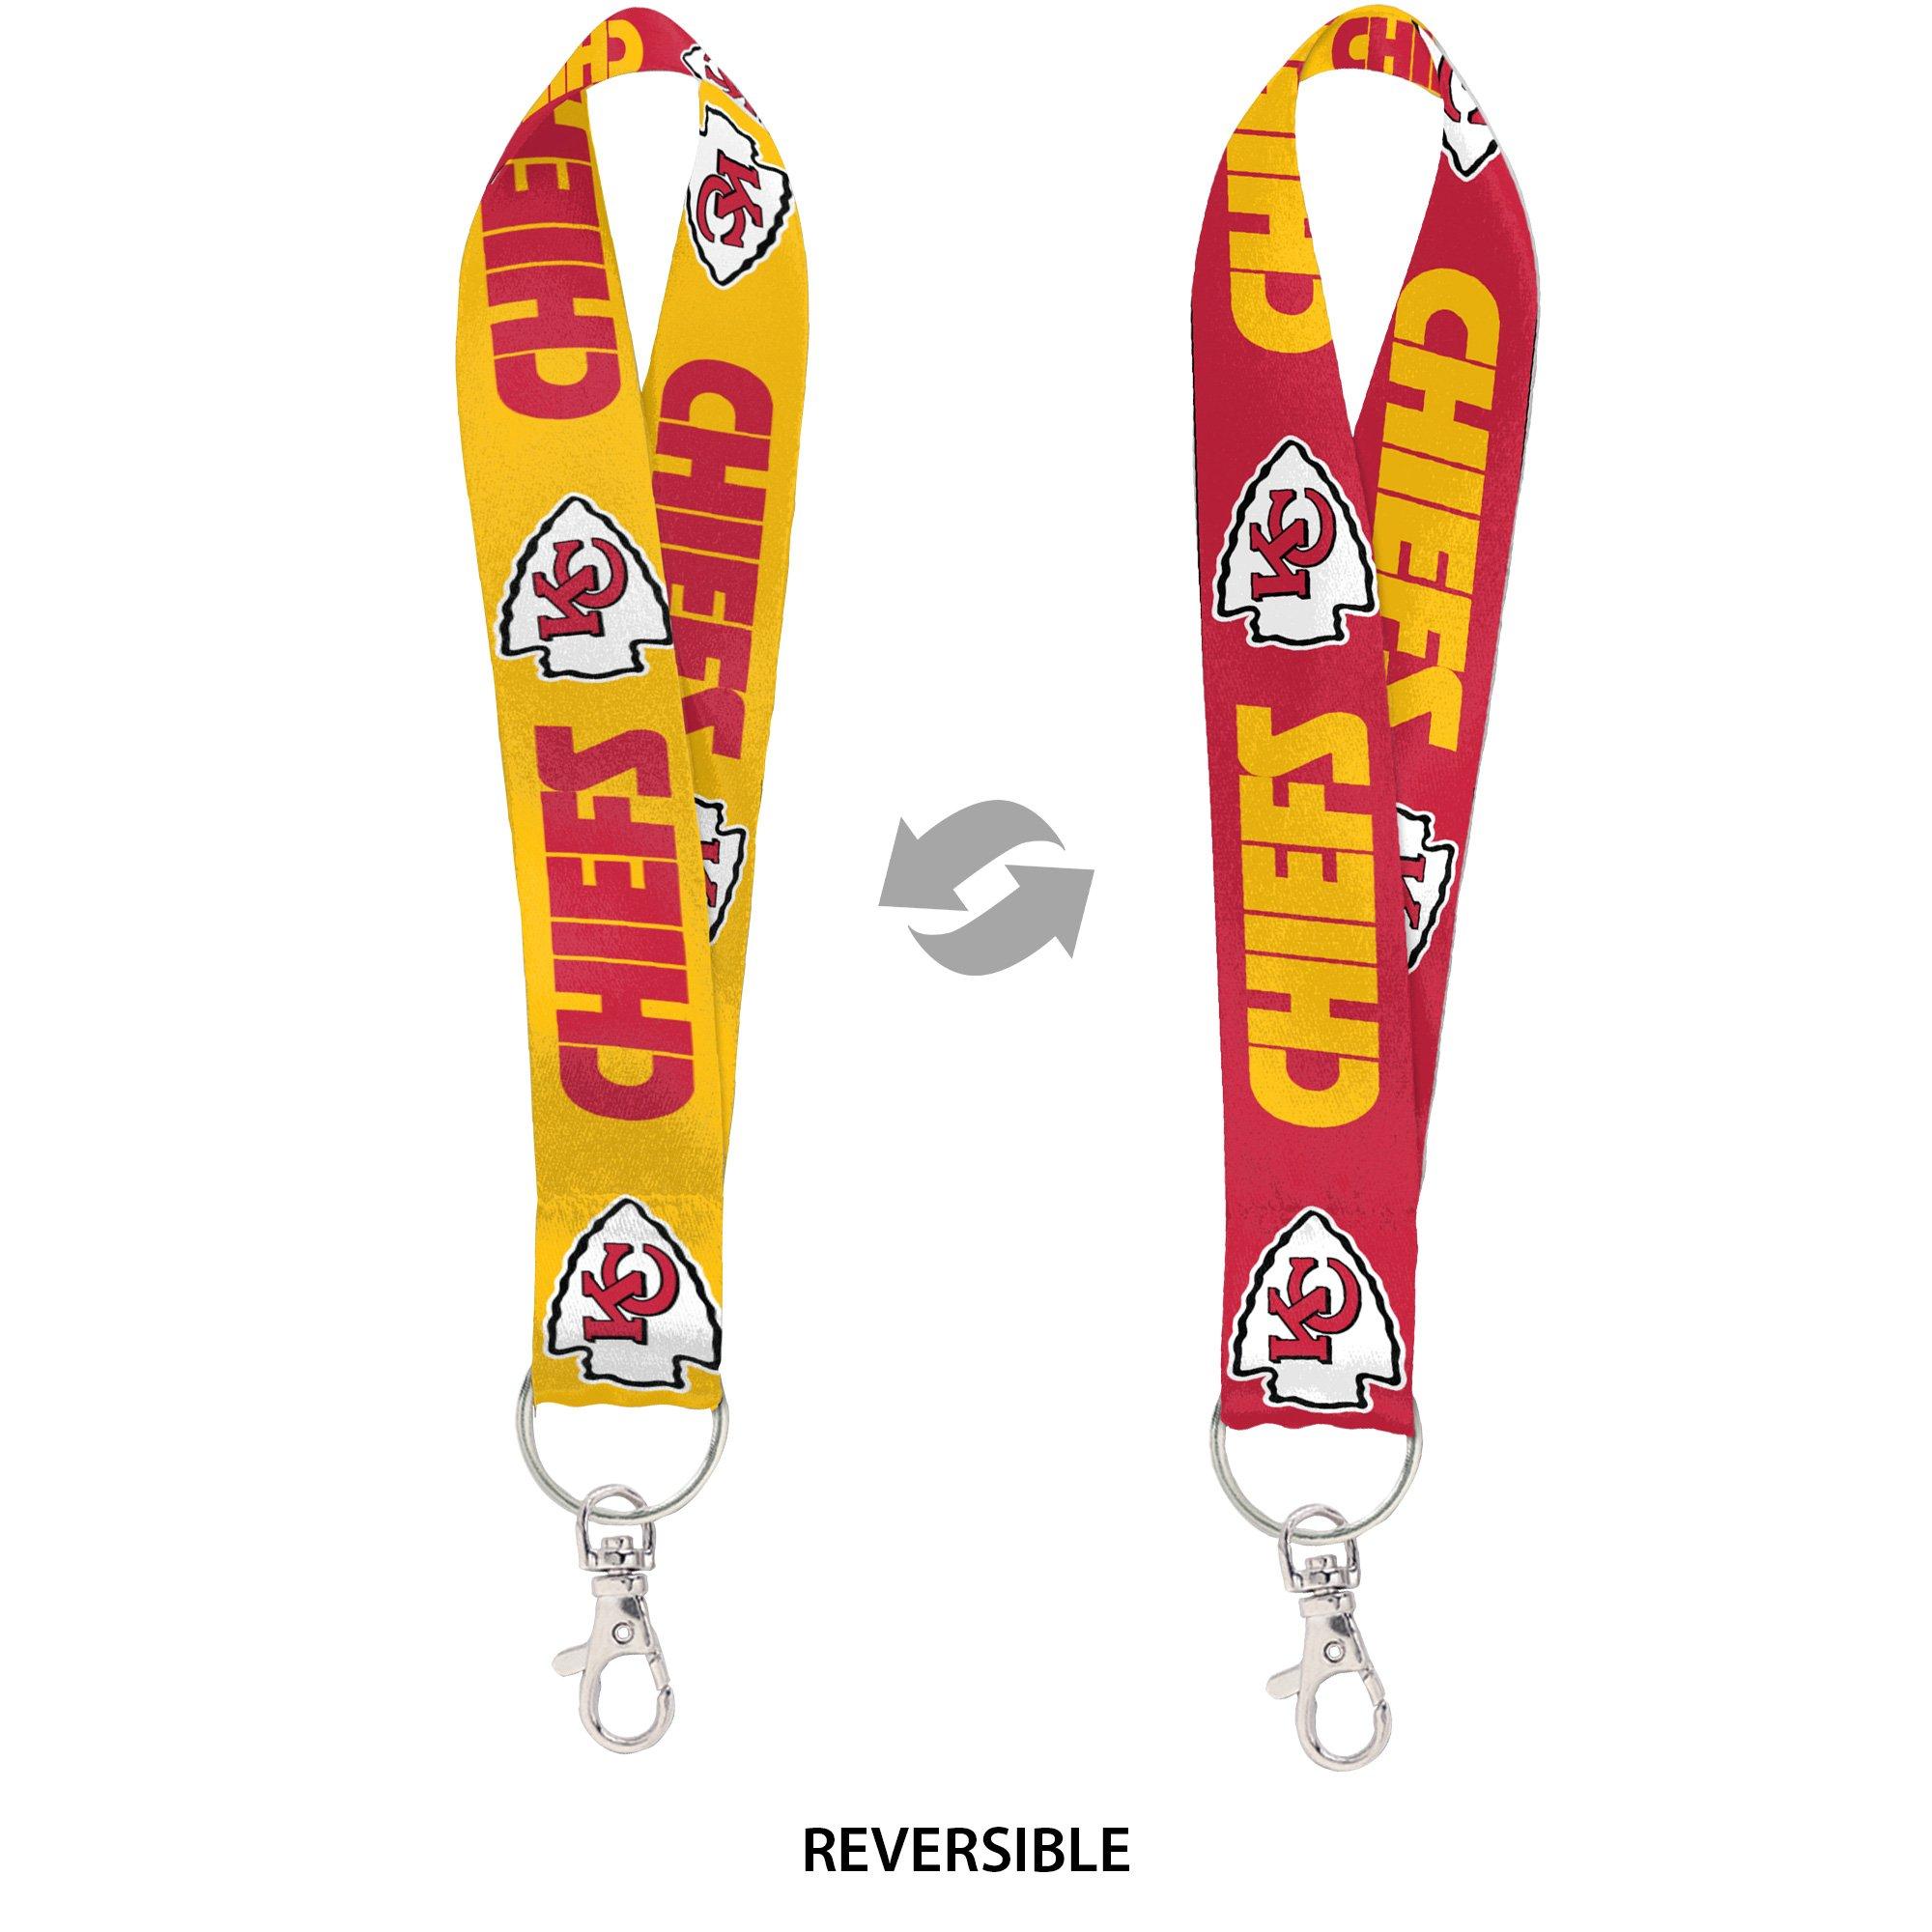 CHIEFS (GOLD/RED) REVERSIBLE LANYARD